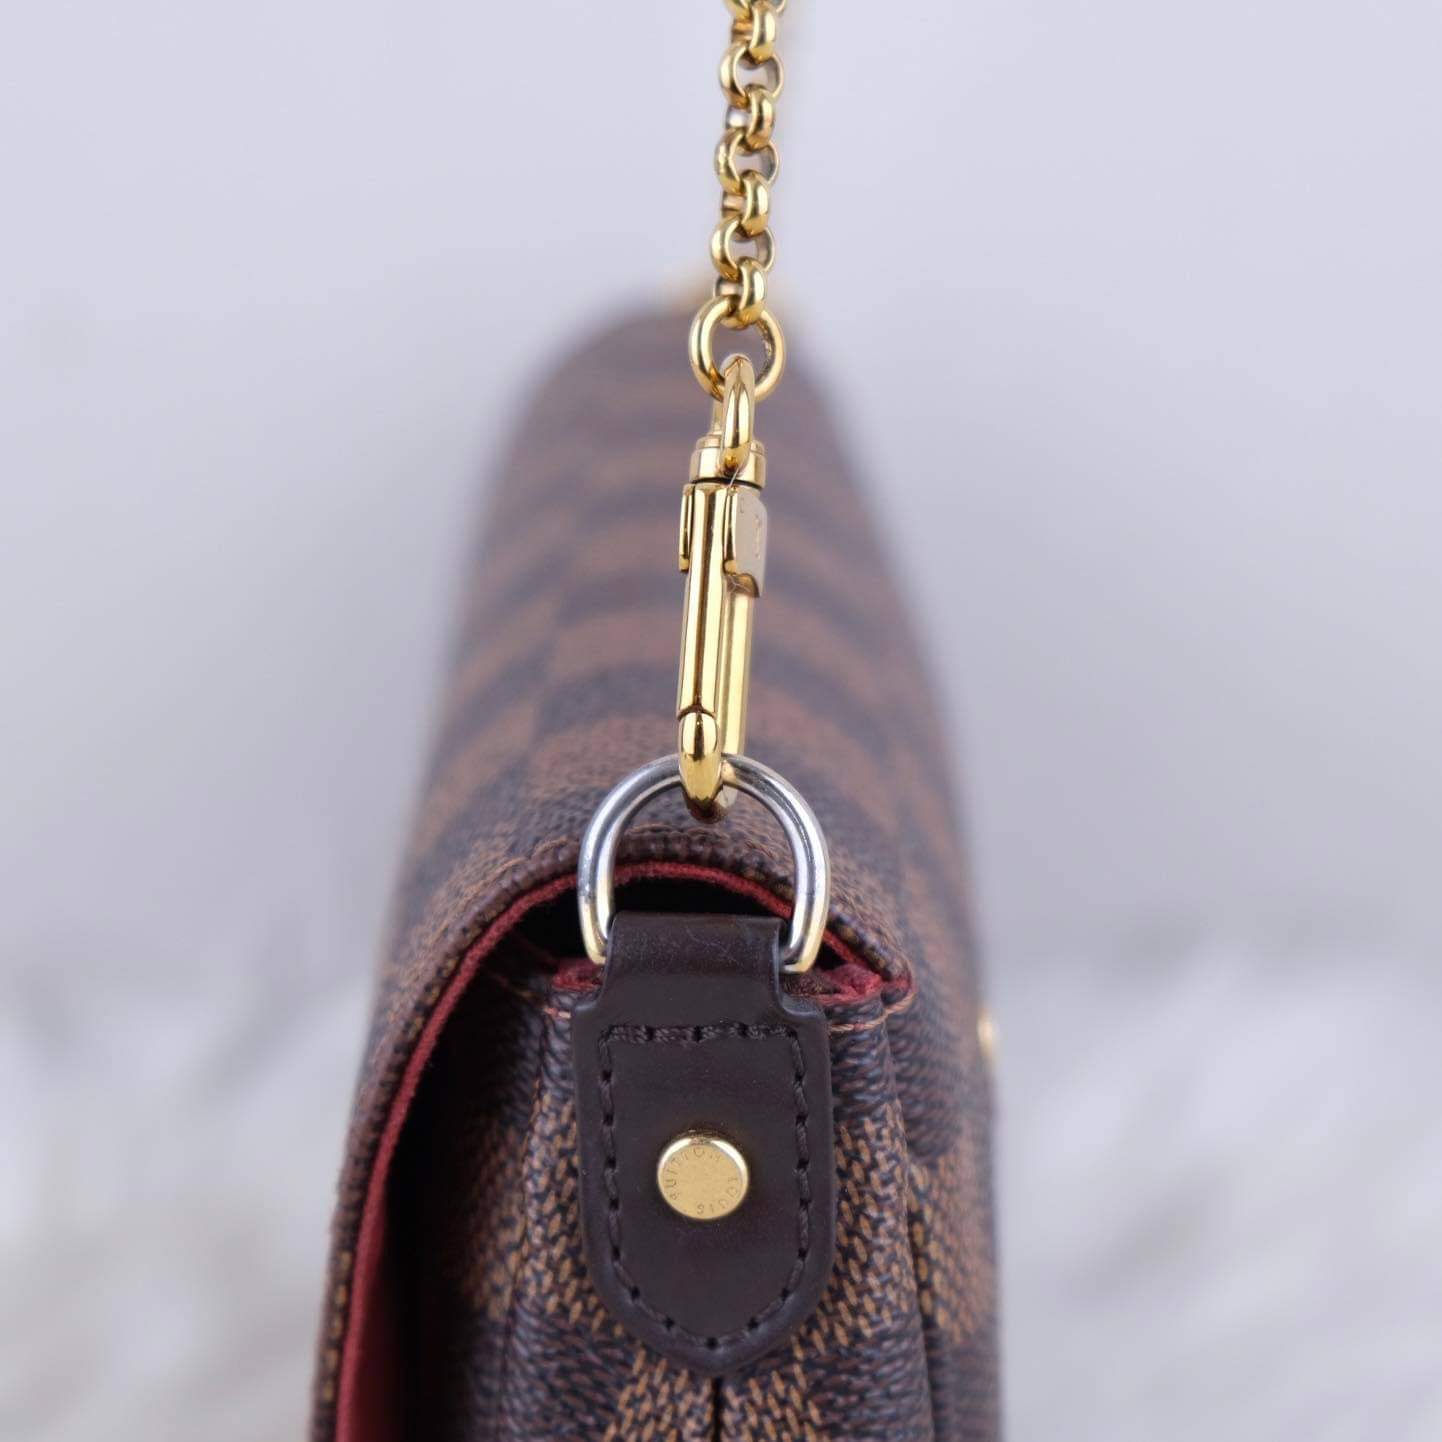 Louis Vuitton Brown Monogram Favorite PM Bag W/ Chain and Leather